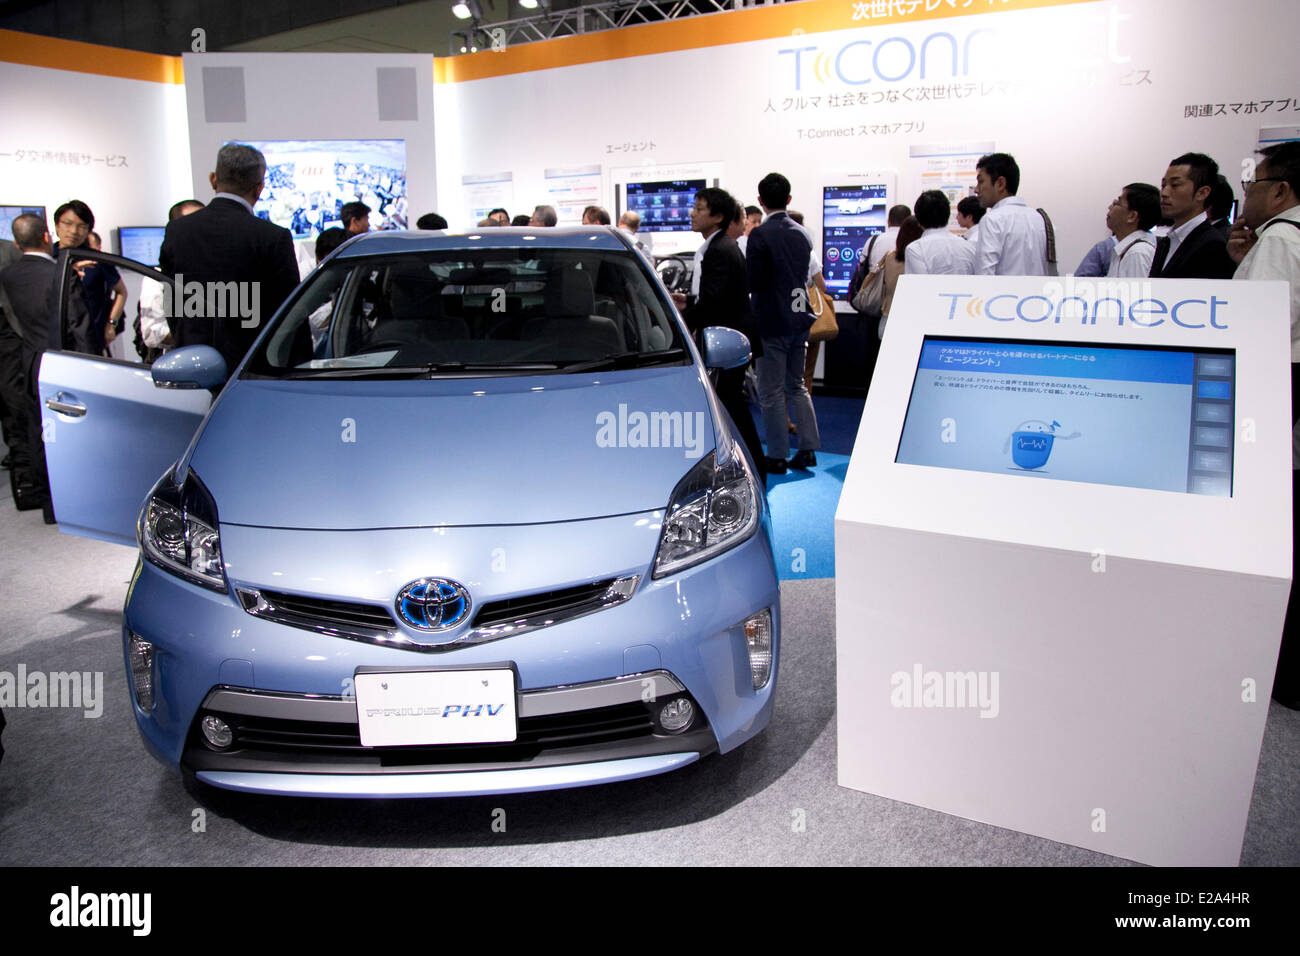 Tokyo, Japan. 18th June, 2014. – The Toyota Prius PHV (Plug-in Hybrid Vehicle) includes the new interactive navigation service 'T-Connect' which is compatible with smart phones at the Smart Community Japan 2014 in Tokyo Big Sight on June 18, 2014. The exhibition brings the latests products and technologies divided in 5 categories, 'Smart Community Exhibition', 'Biomass Expo', 'Next Generation Vehicle Exhibition, and newly-created 'Community Cloud 2014', which introduces technology for urban development. This year 229 enterprises and organizations shows their products from June 18th to 20th. (P Stock Photo